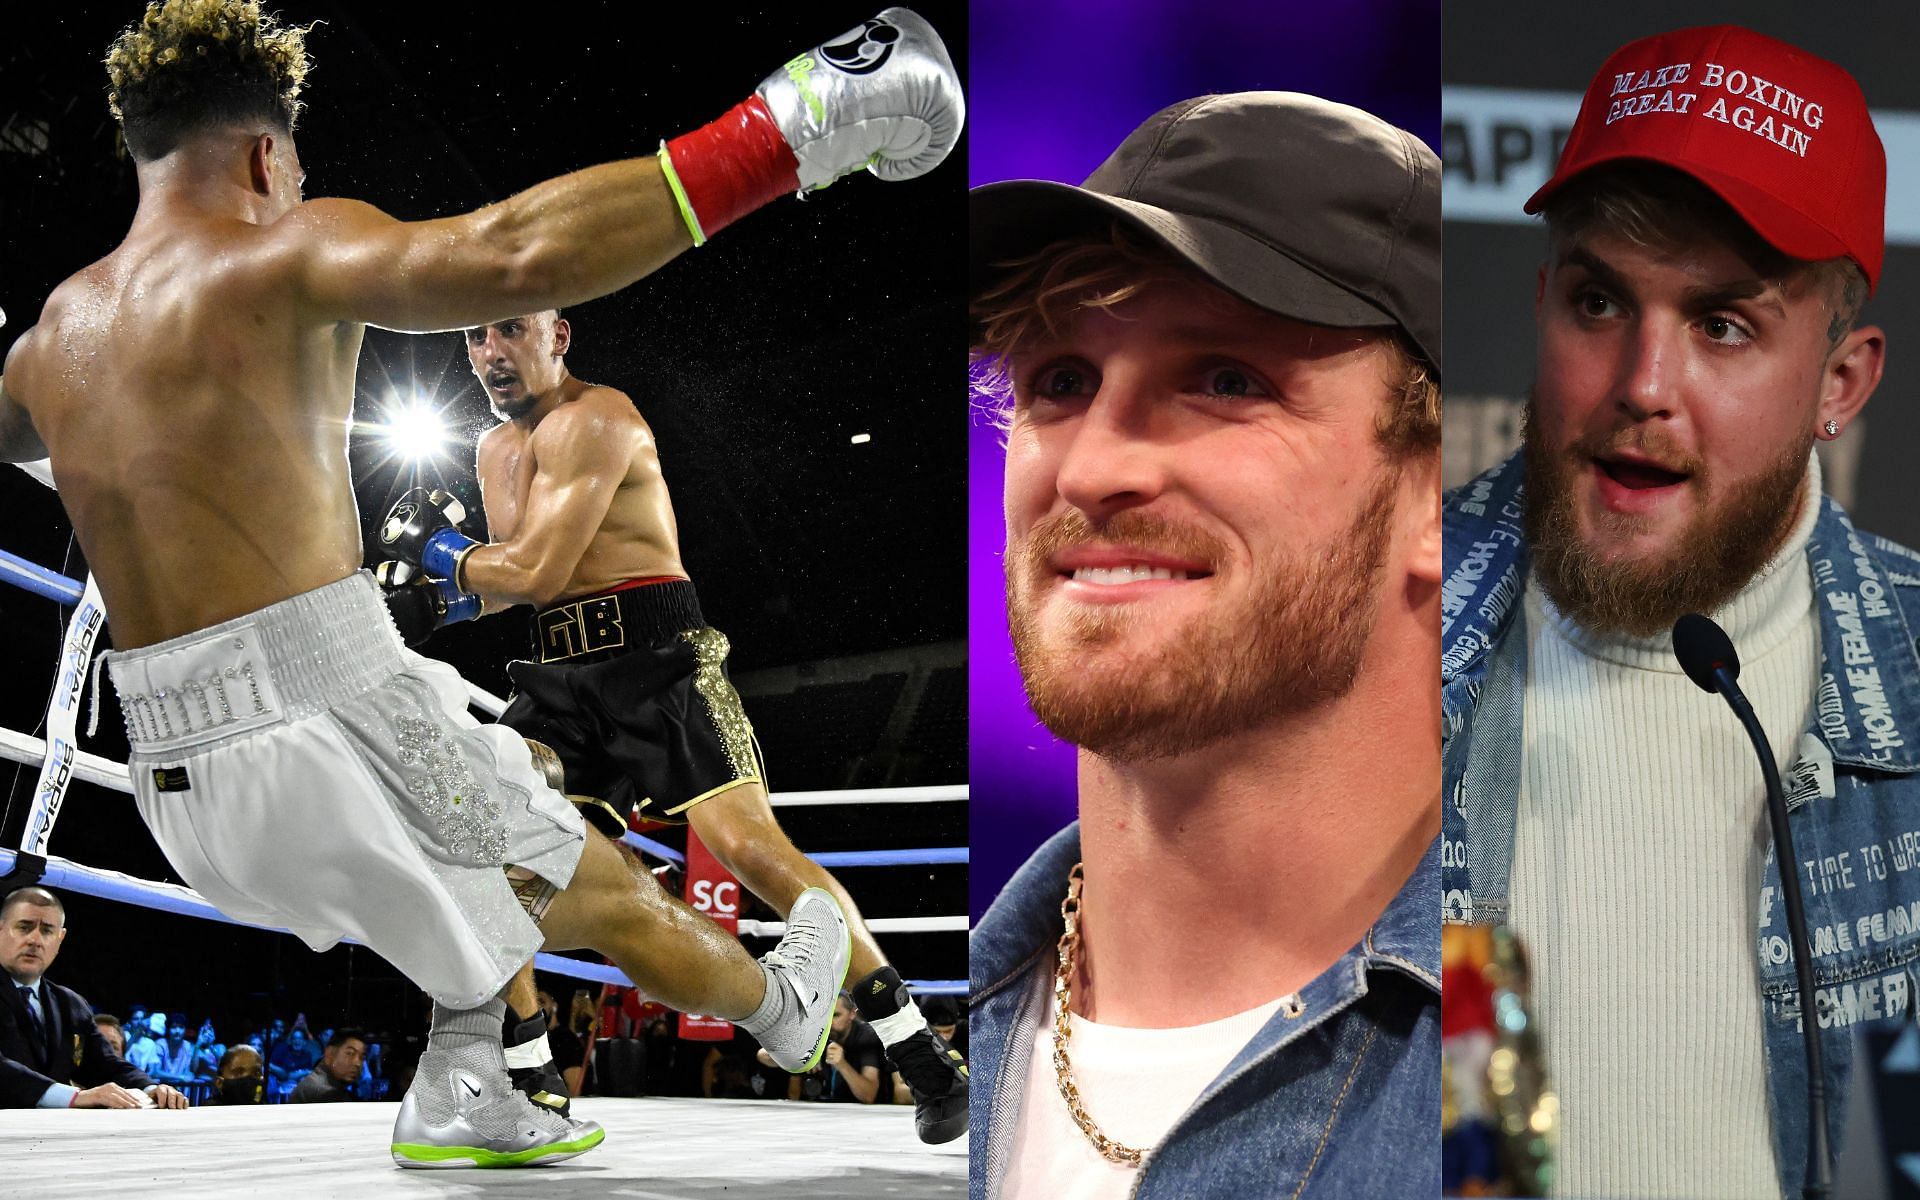 AnEsonGib knocking out Austin McBroom (left) Logan Paul (center), and Jake Paul (right) (Image credits Getty Images)